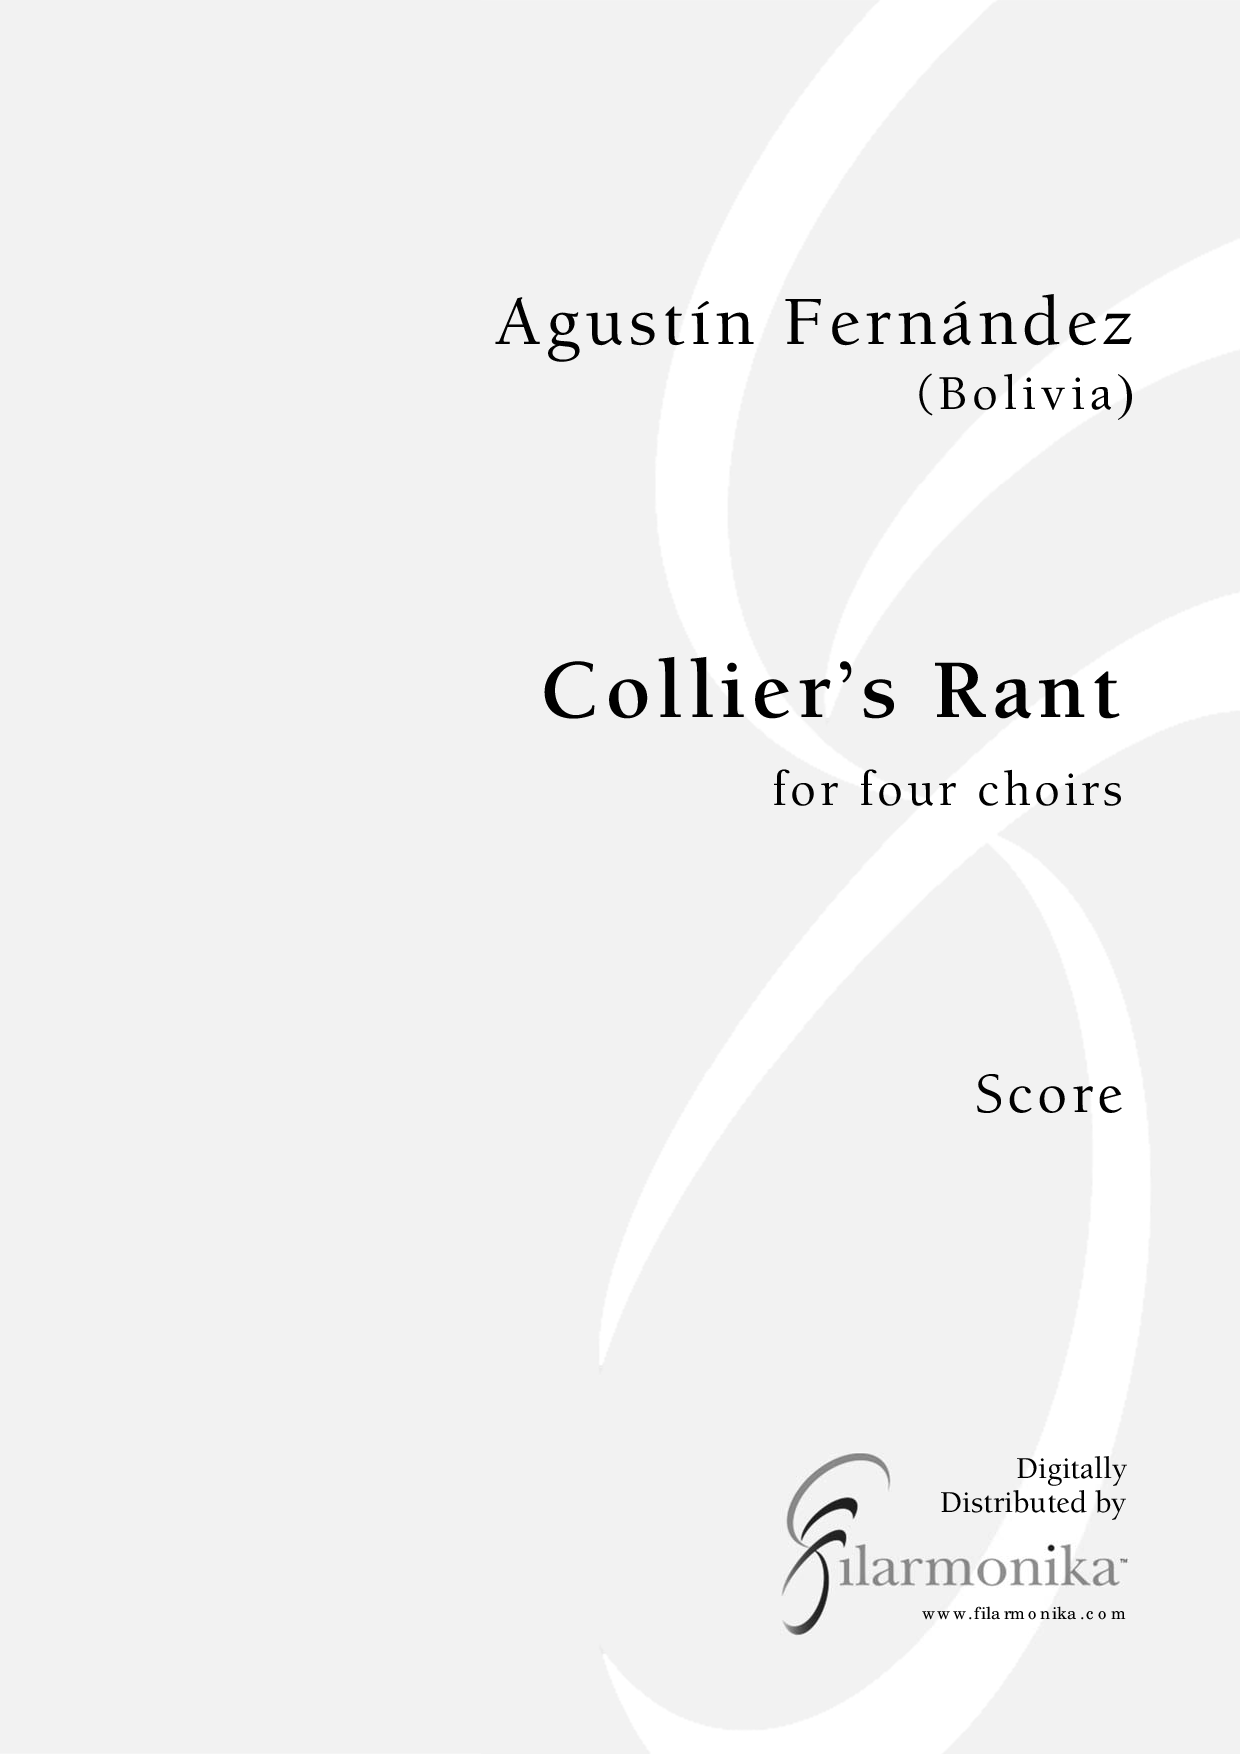 Collier's Rant, for 4 choirs